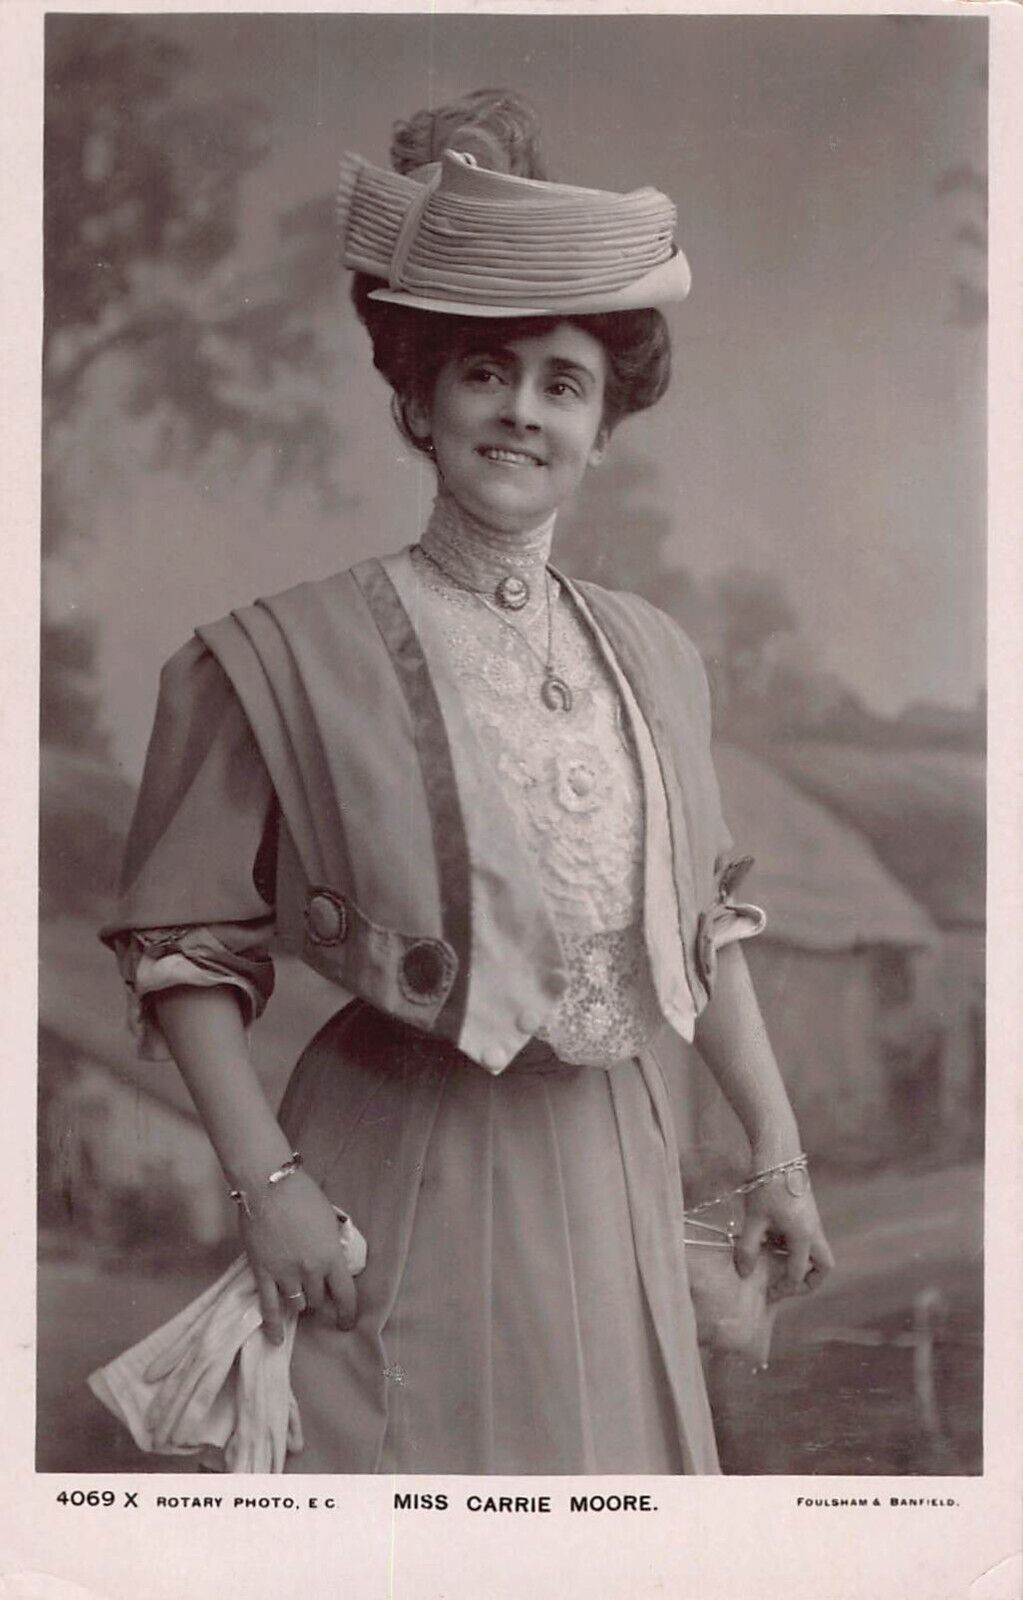 CARRIE MOORE EDWARDIAN THEATRE ACTRESS~1907 ROTARY PHOTO POSTCARD